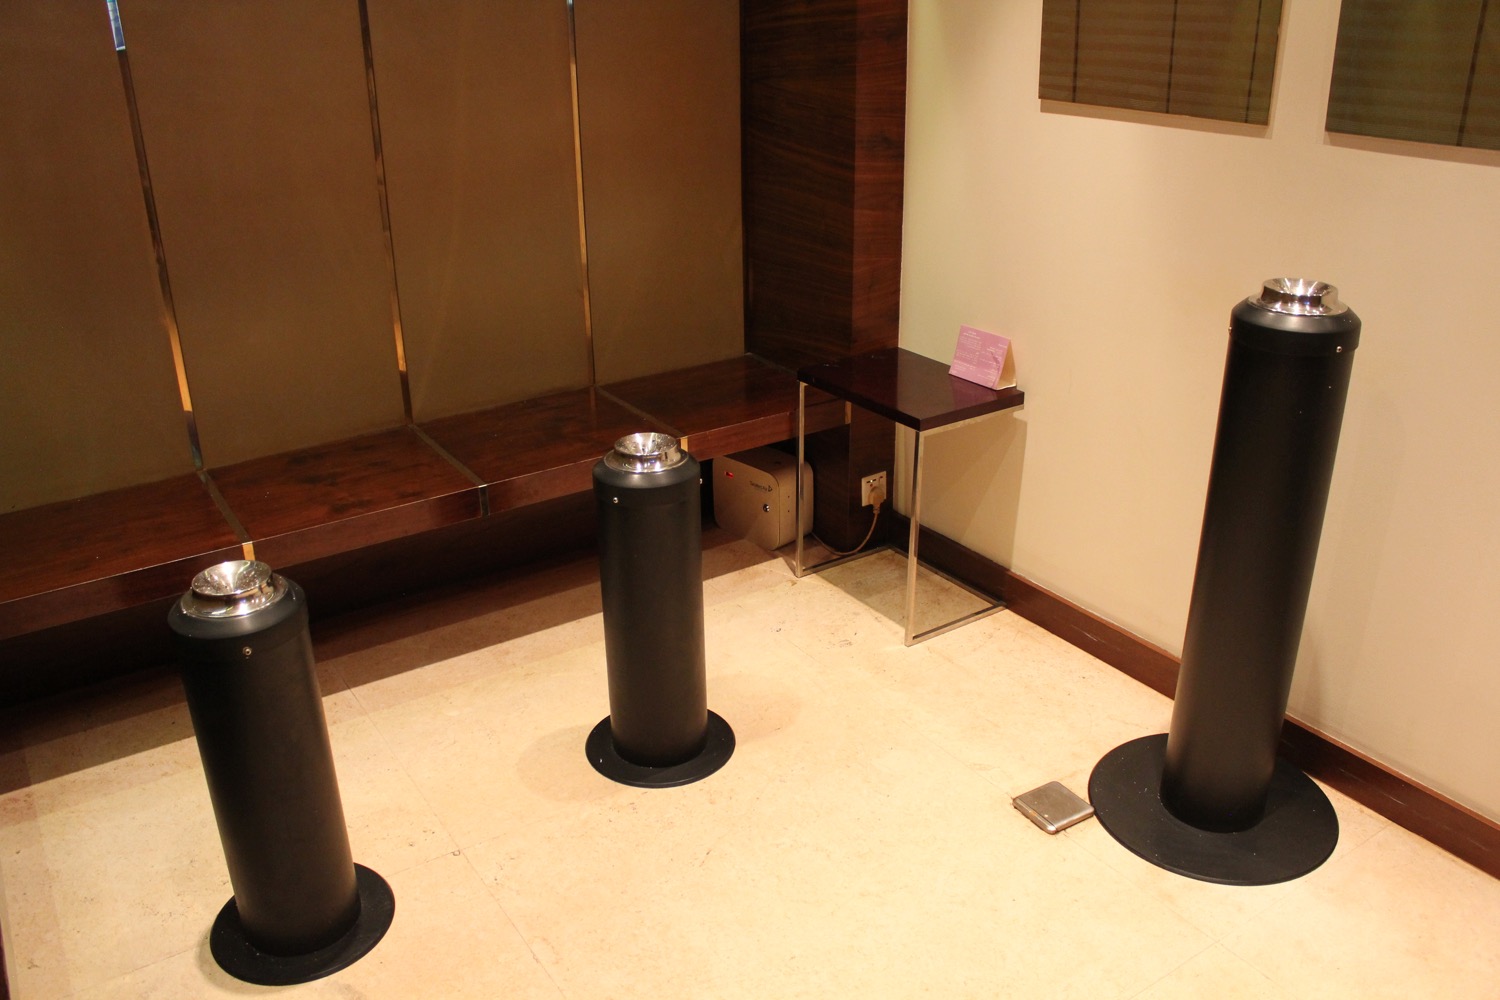 a group of black pillars in a room